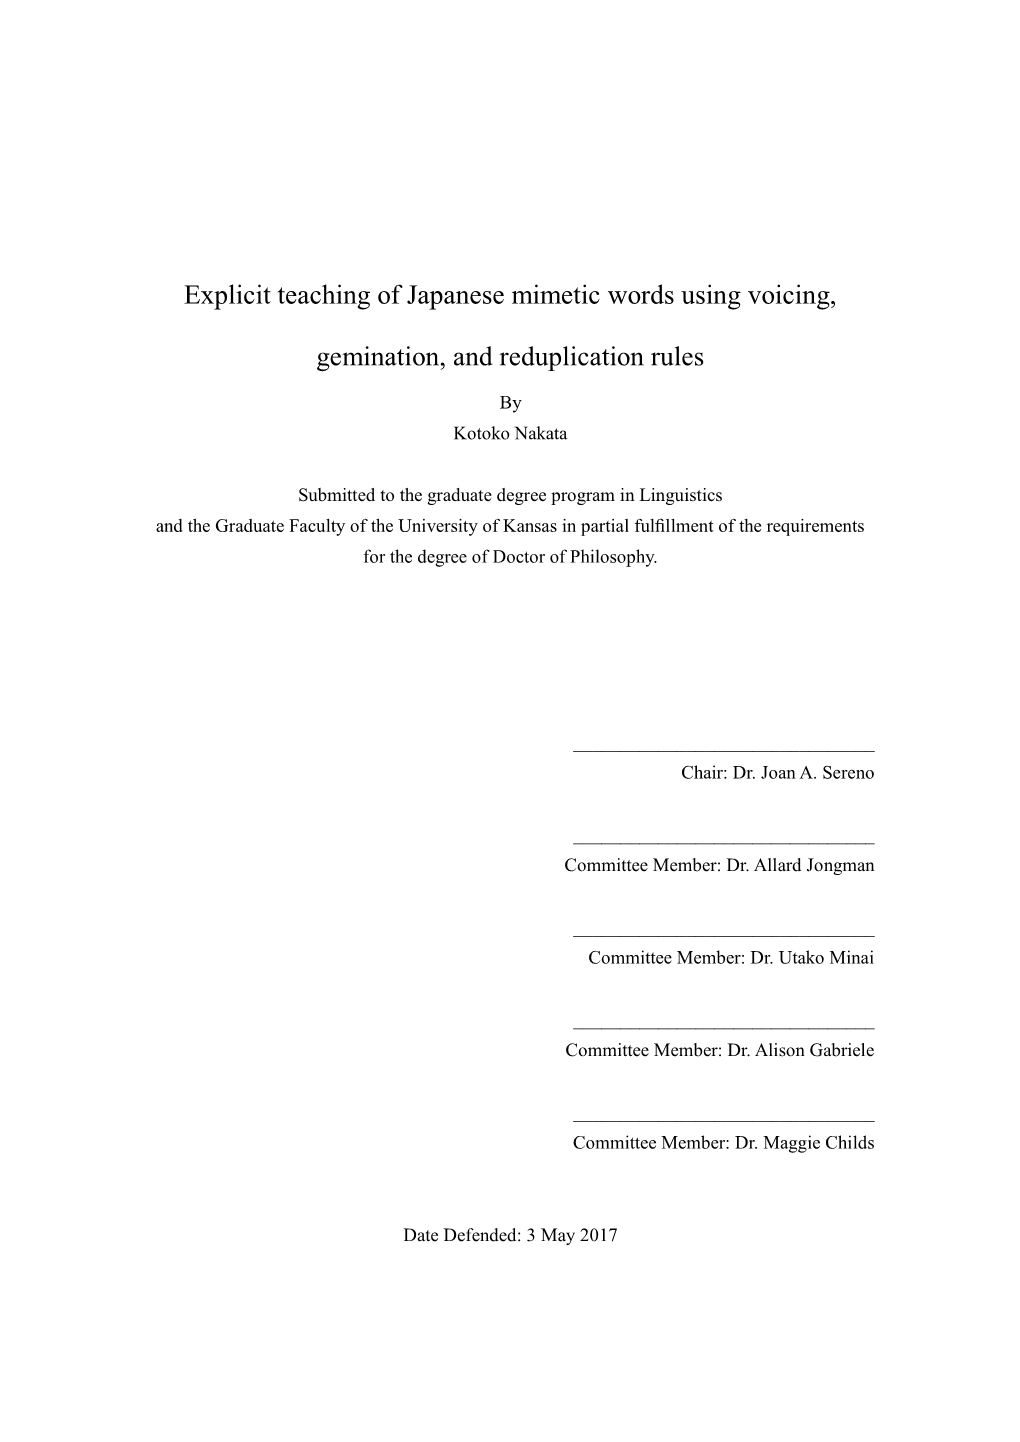 Explicit Teaching of Japanese Mimetic Words Using Voicing, Gemination, and Reduplication Rules